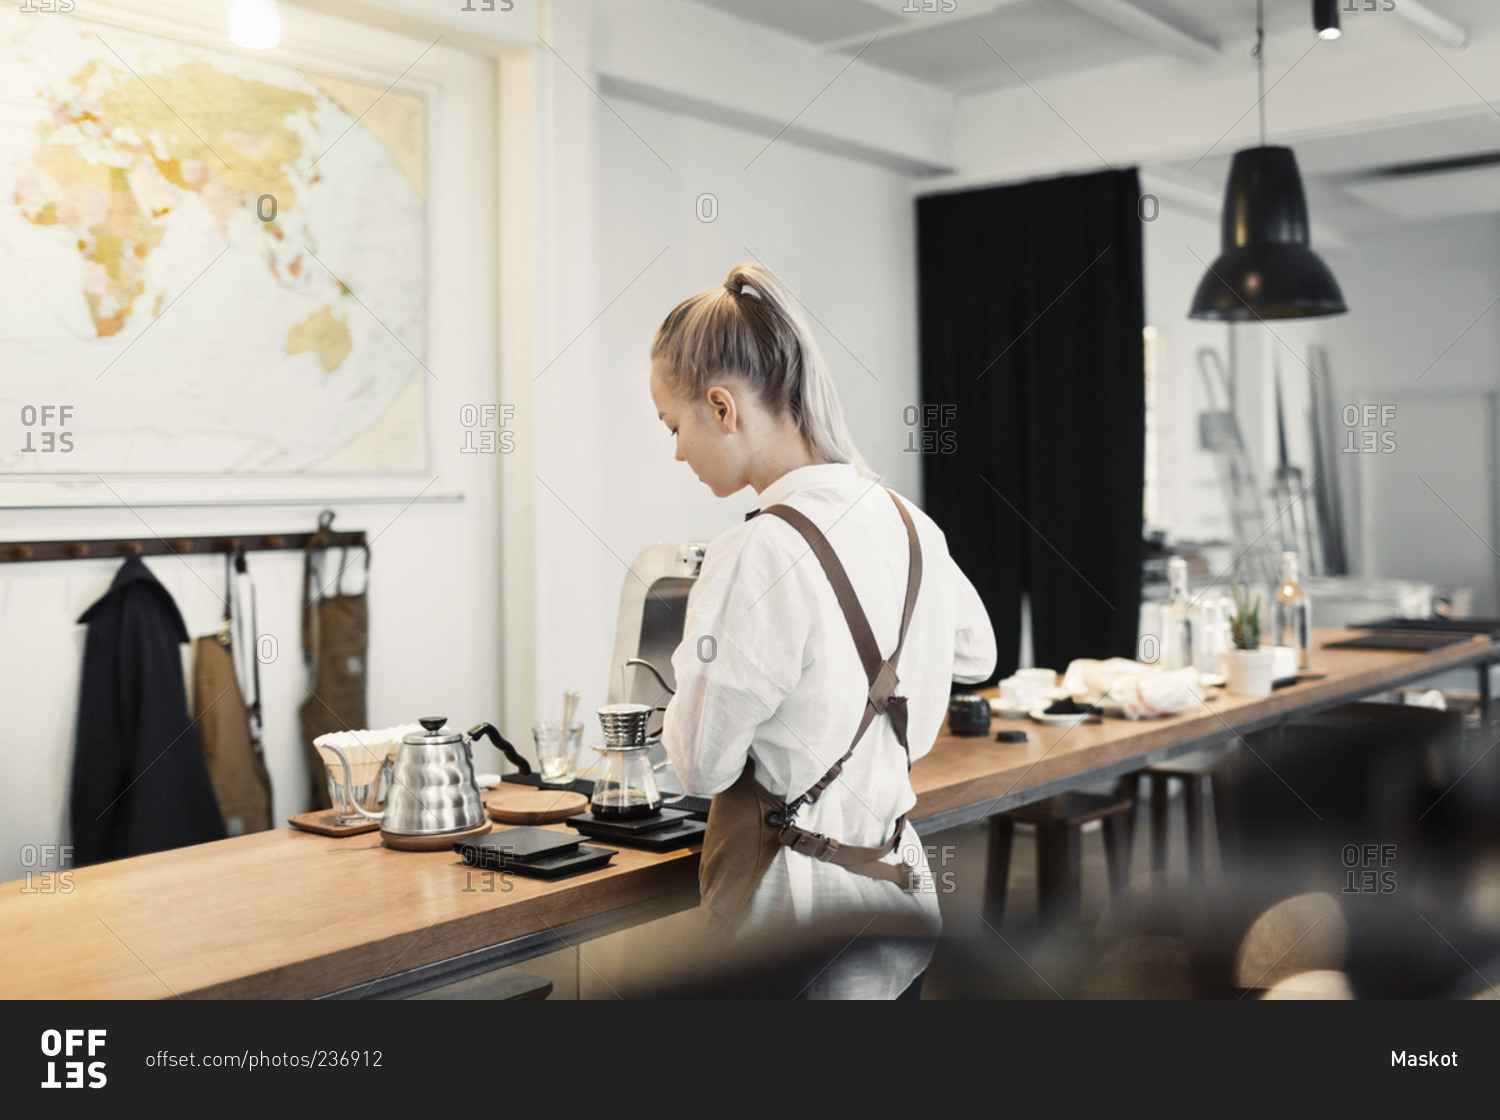 Rear view of young female barista preparing coffee at counter